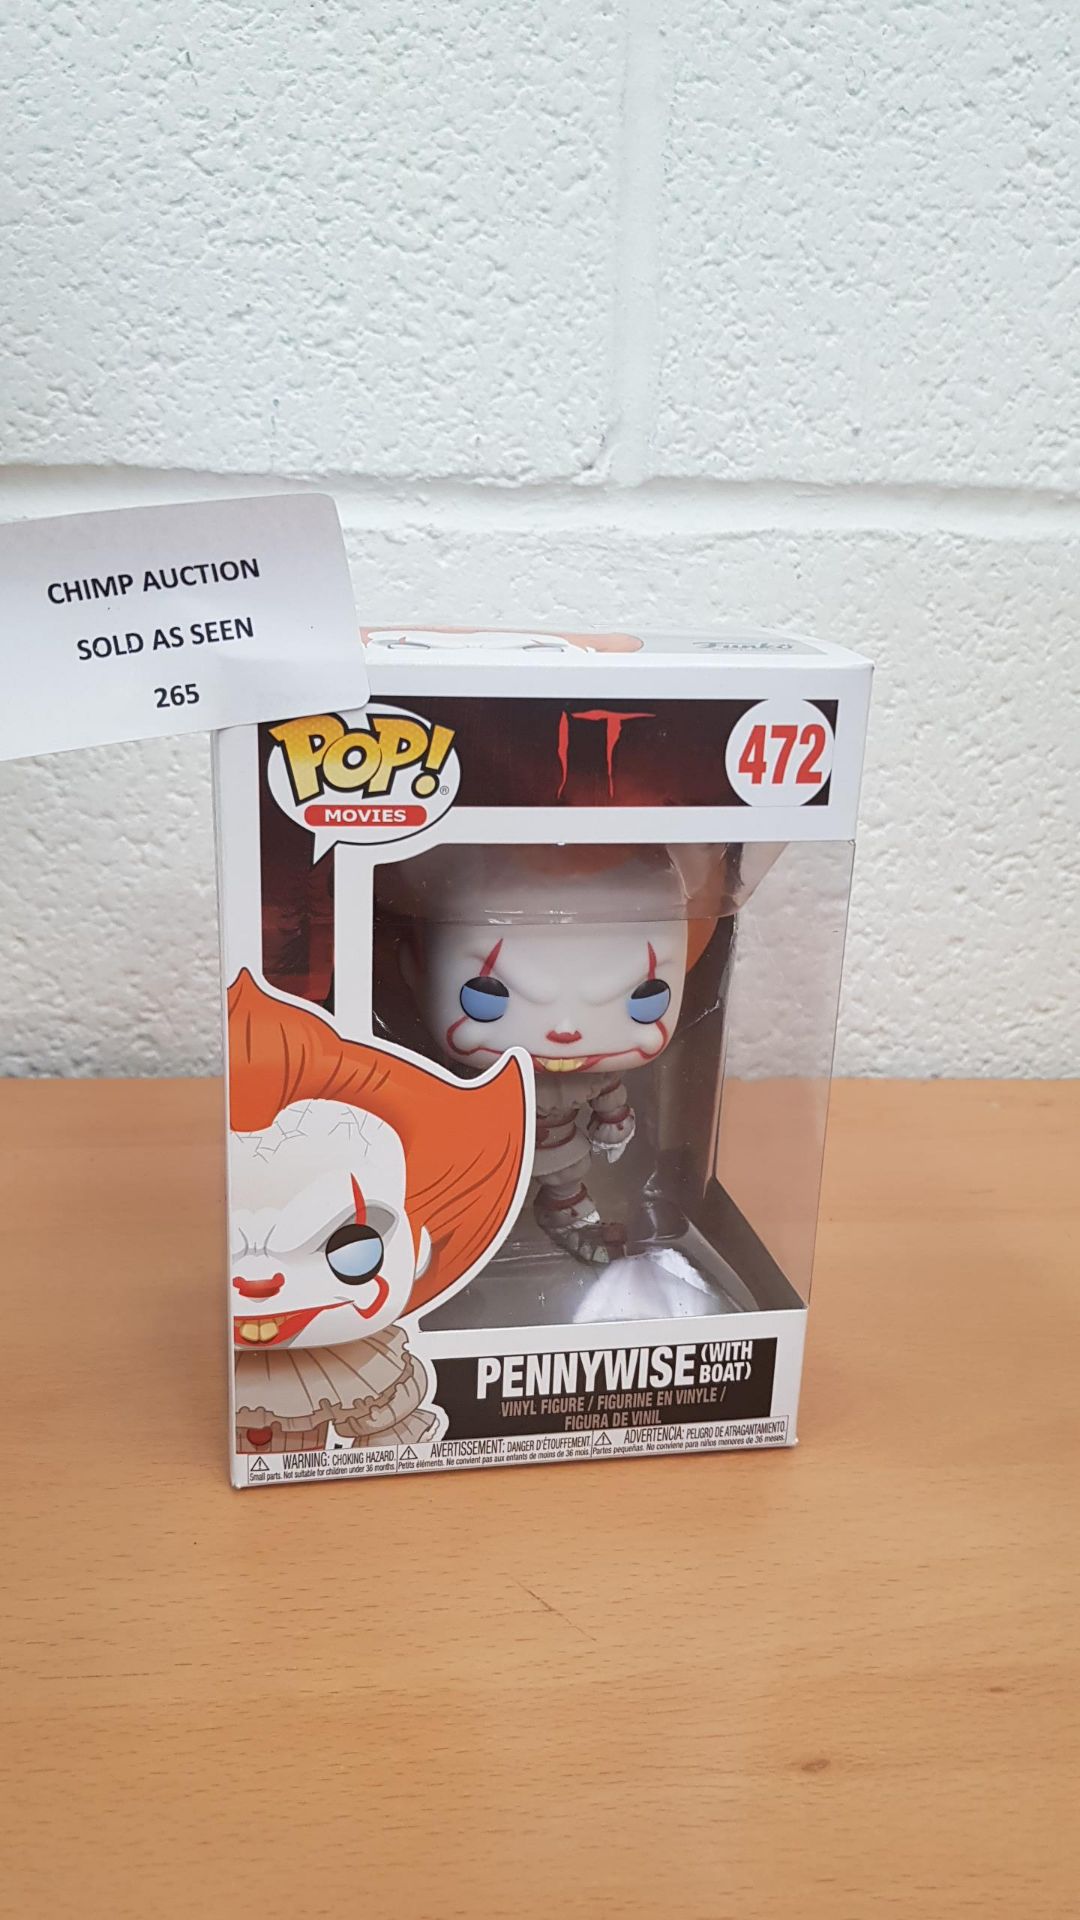 Pop! IT PennyWise with Boat collectible